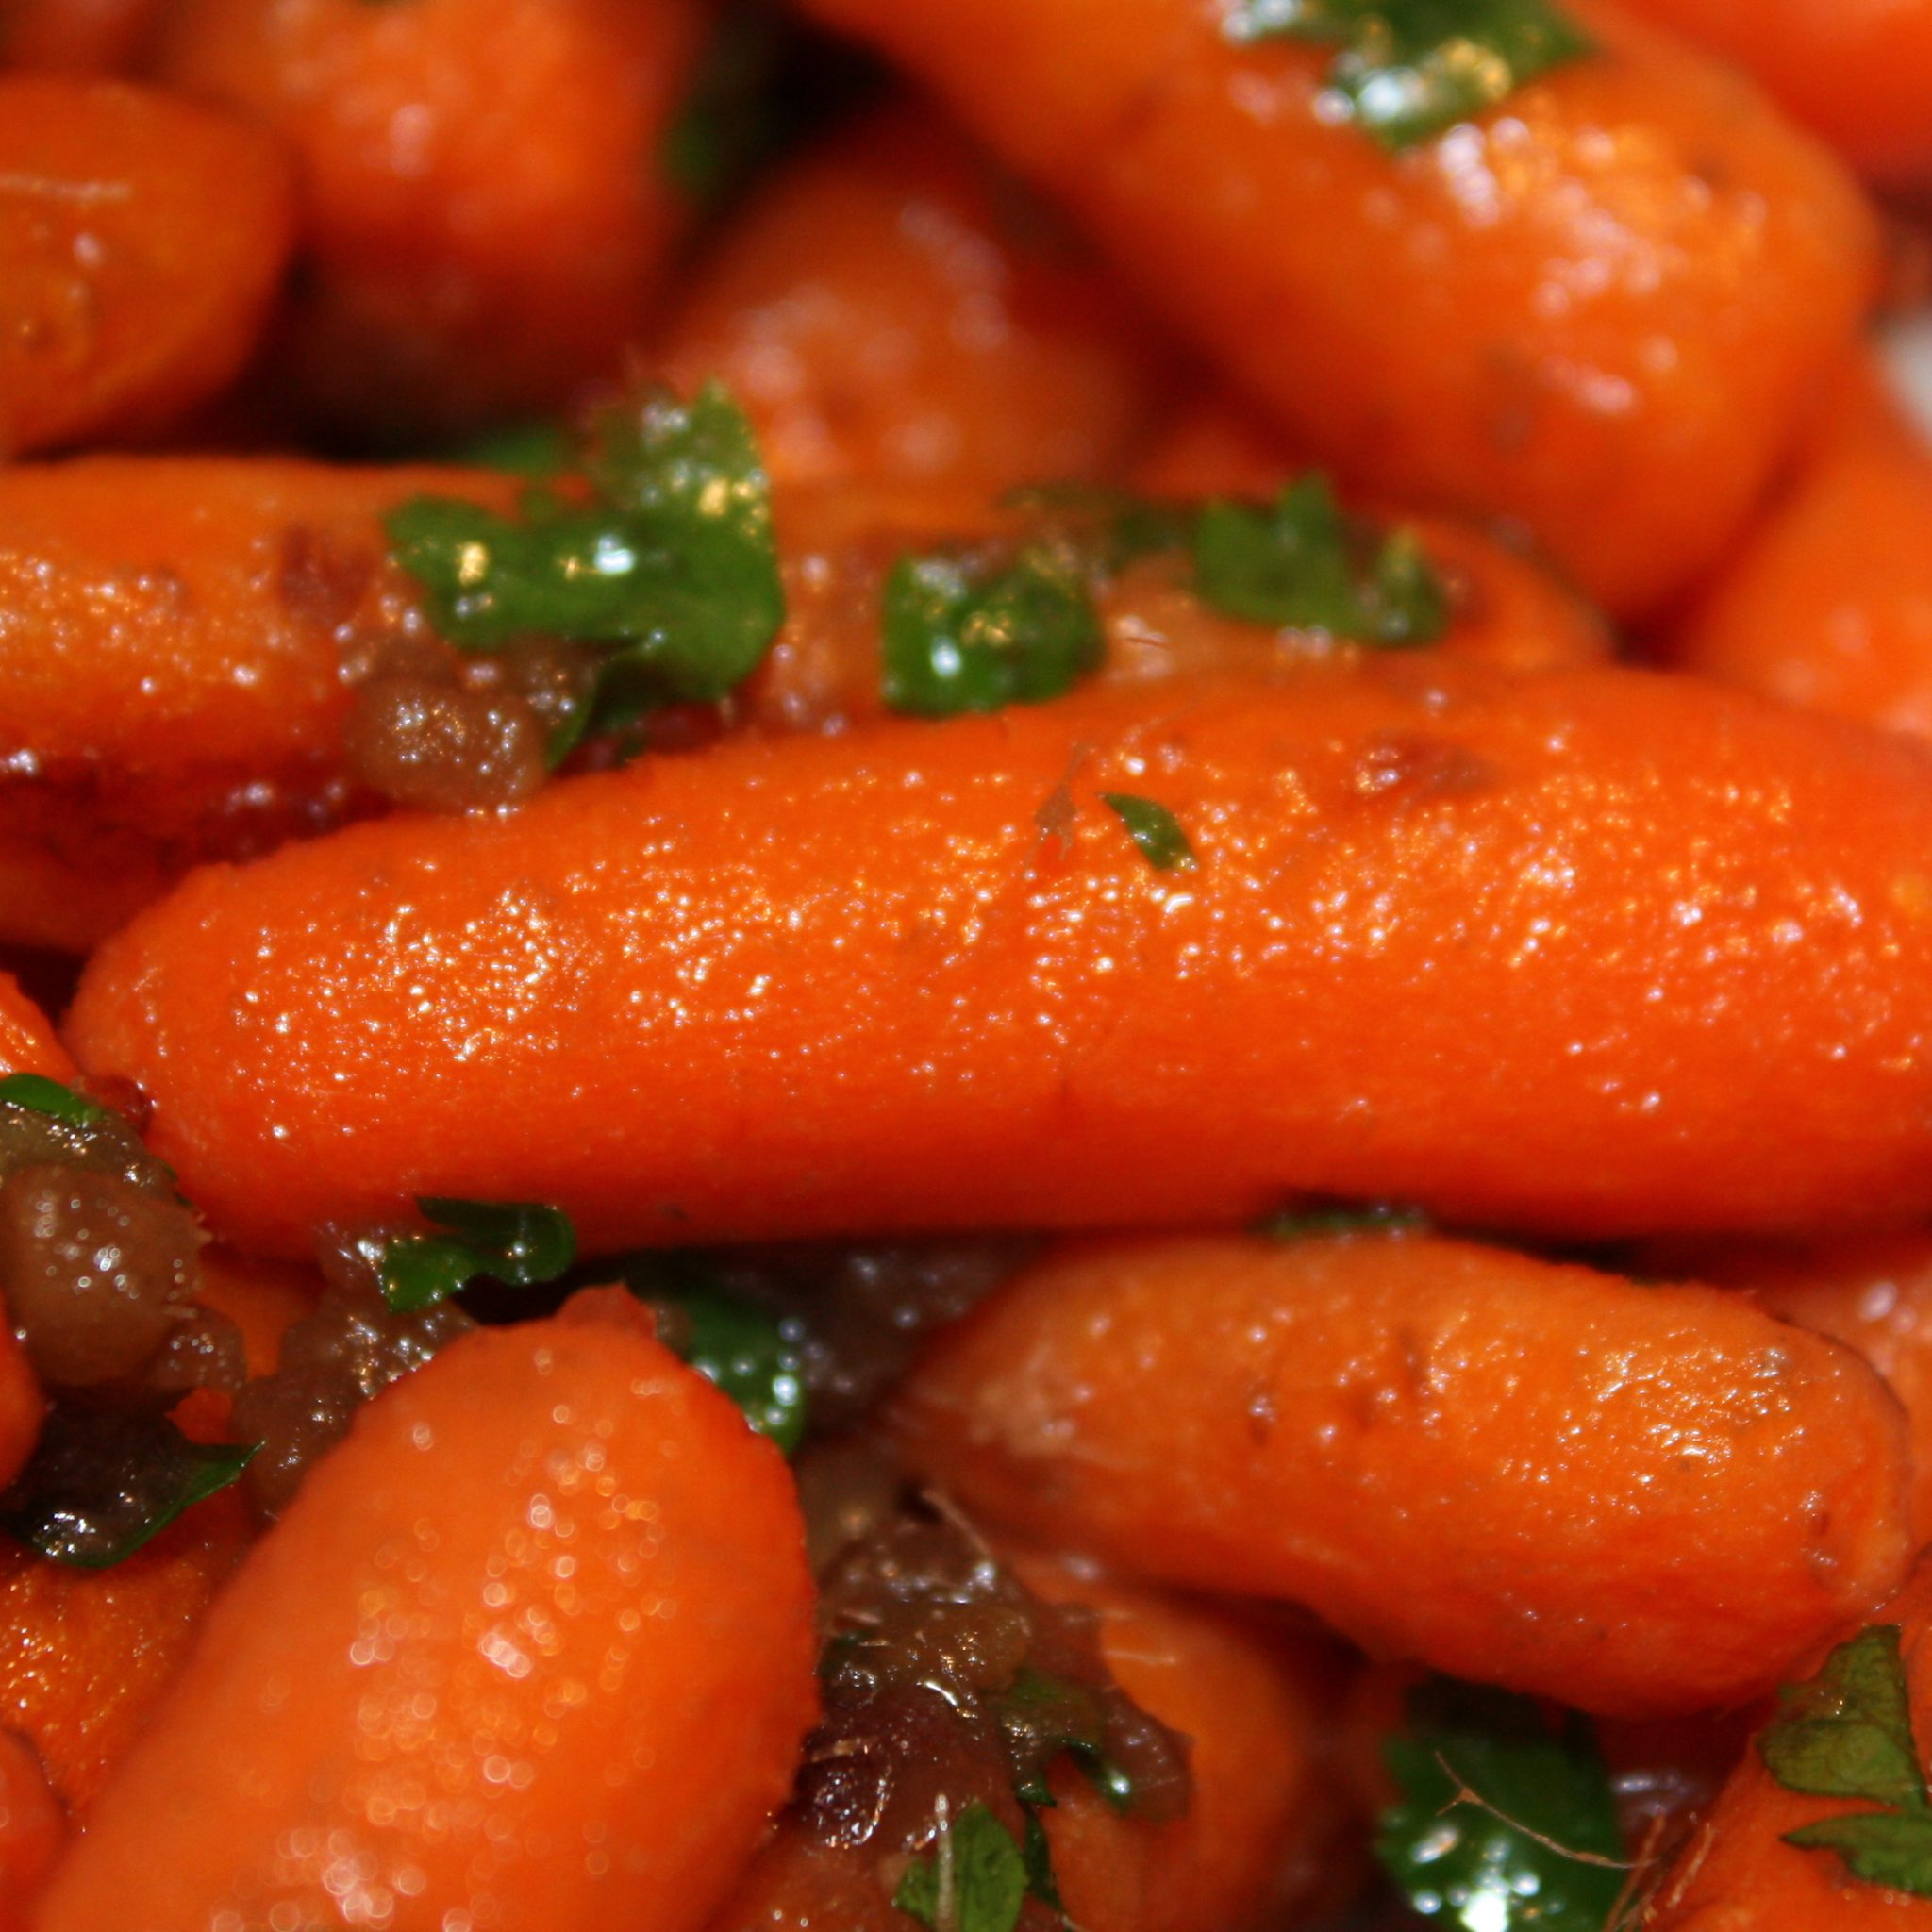 Roasted Carrots flavored with melted anchovies